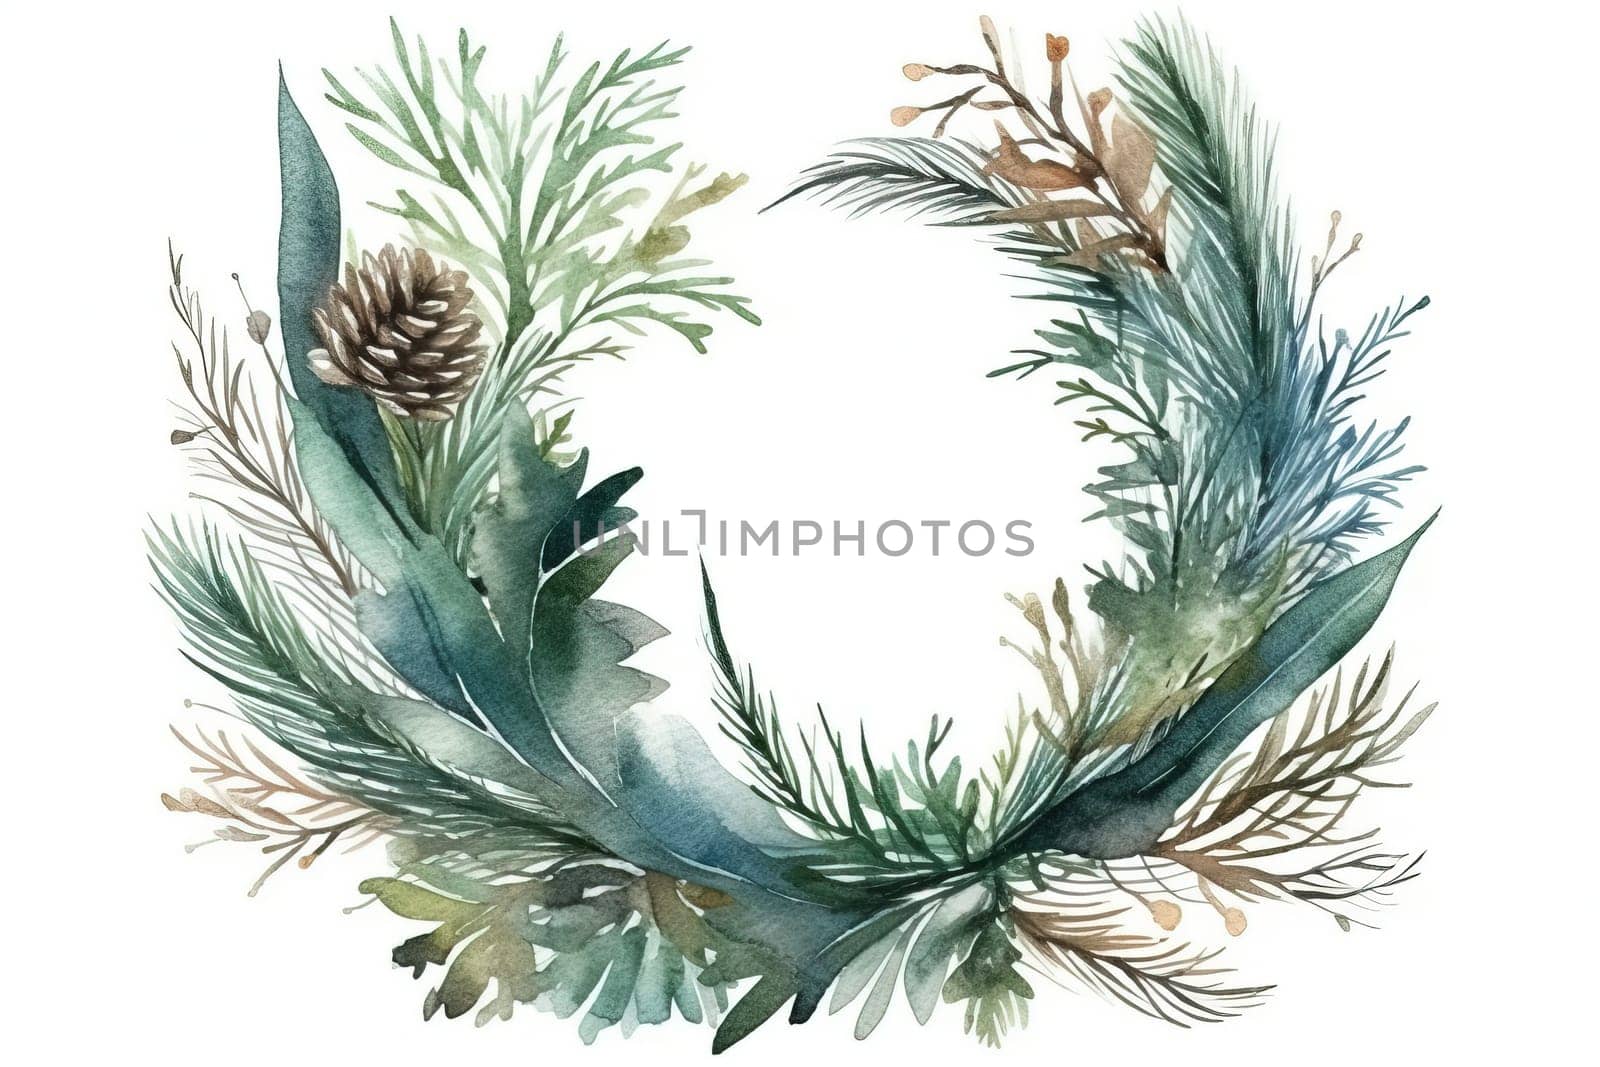 Watercolor Illustration Of Floral Green Pattern Wreath With Conifer Needles And Cones by GekaSkr